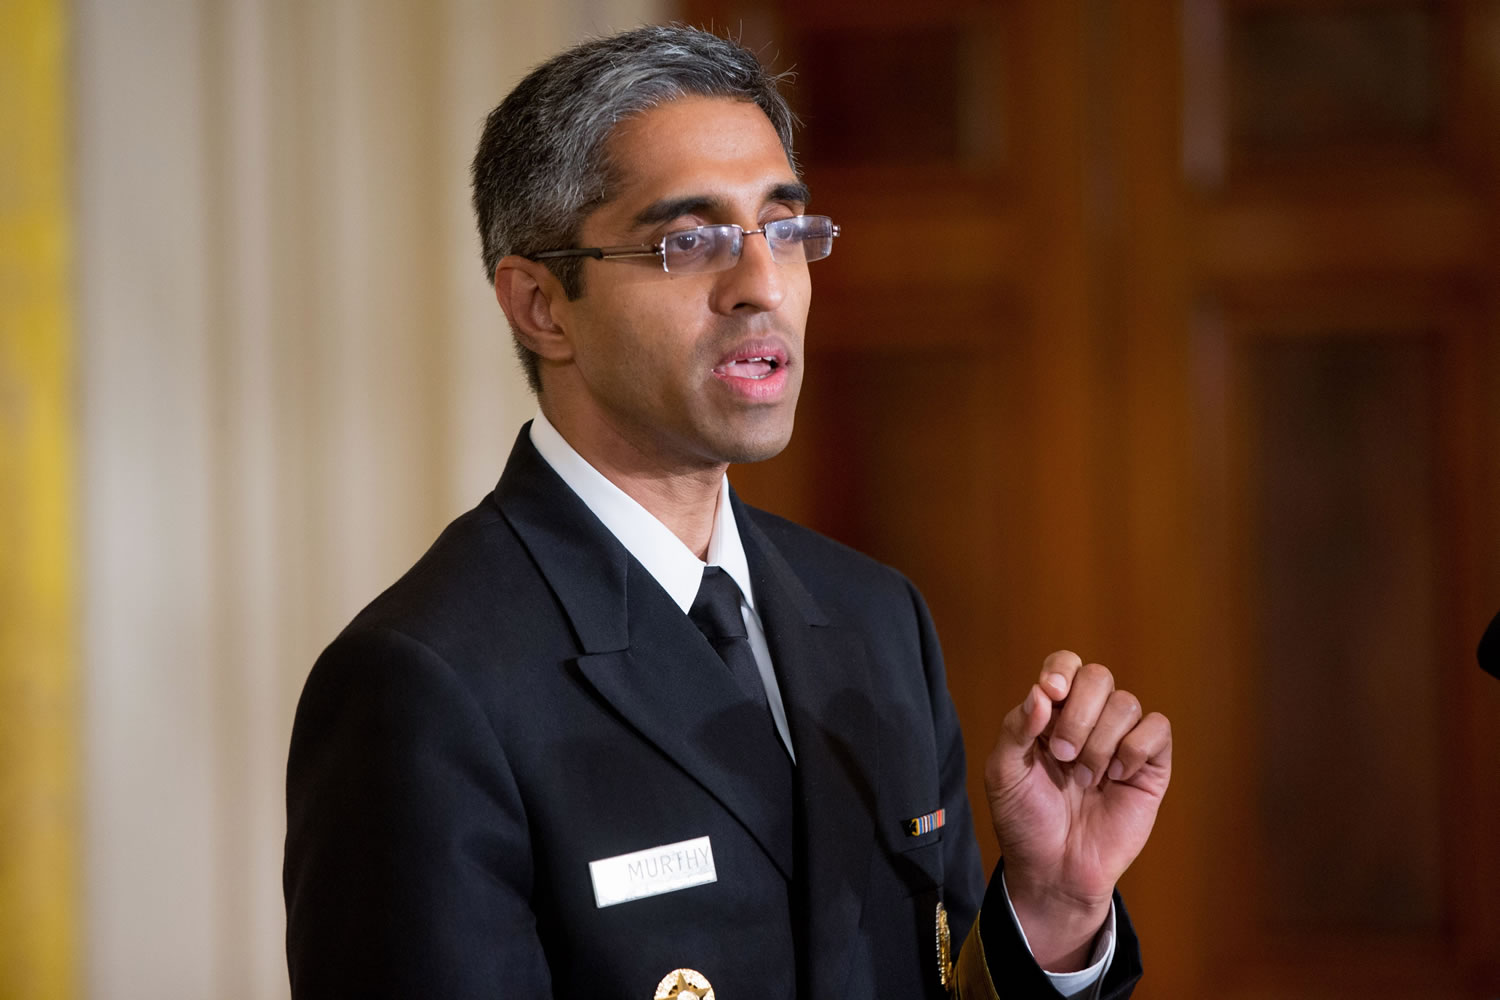 U.S. Surgeon General Vivek Murthy speaks in the East Room at the White House in Washington on Aug. 3.